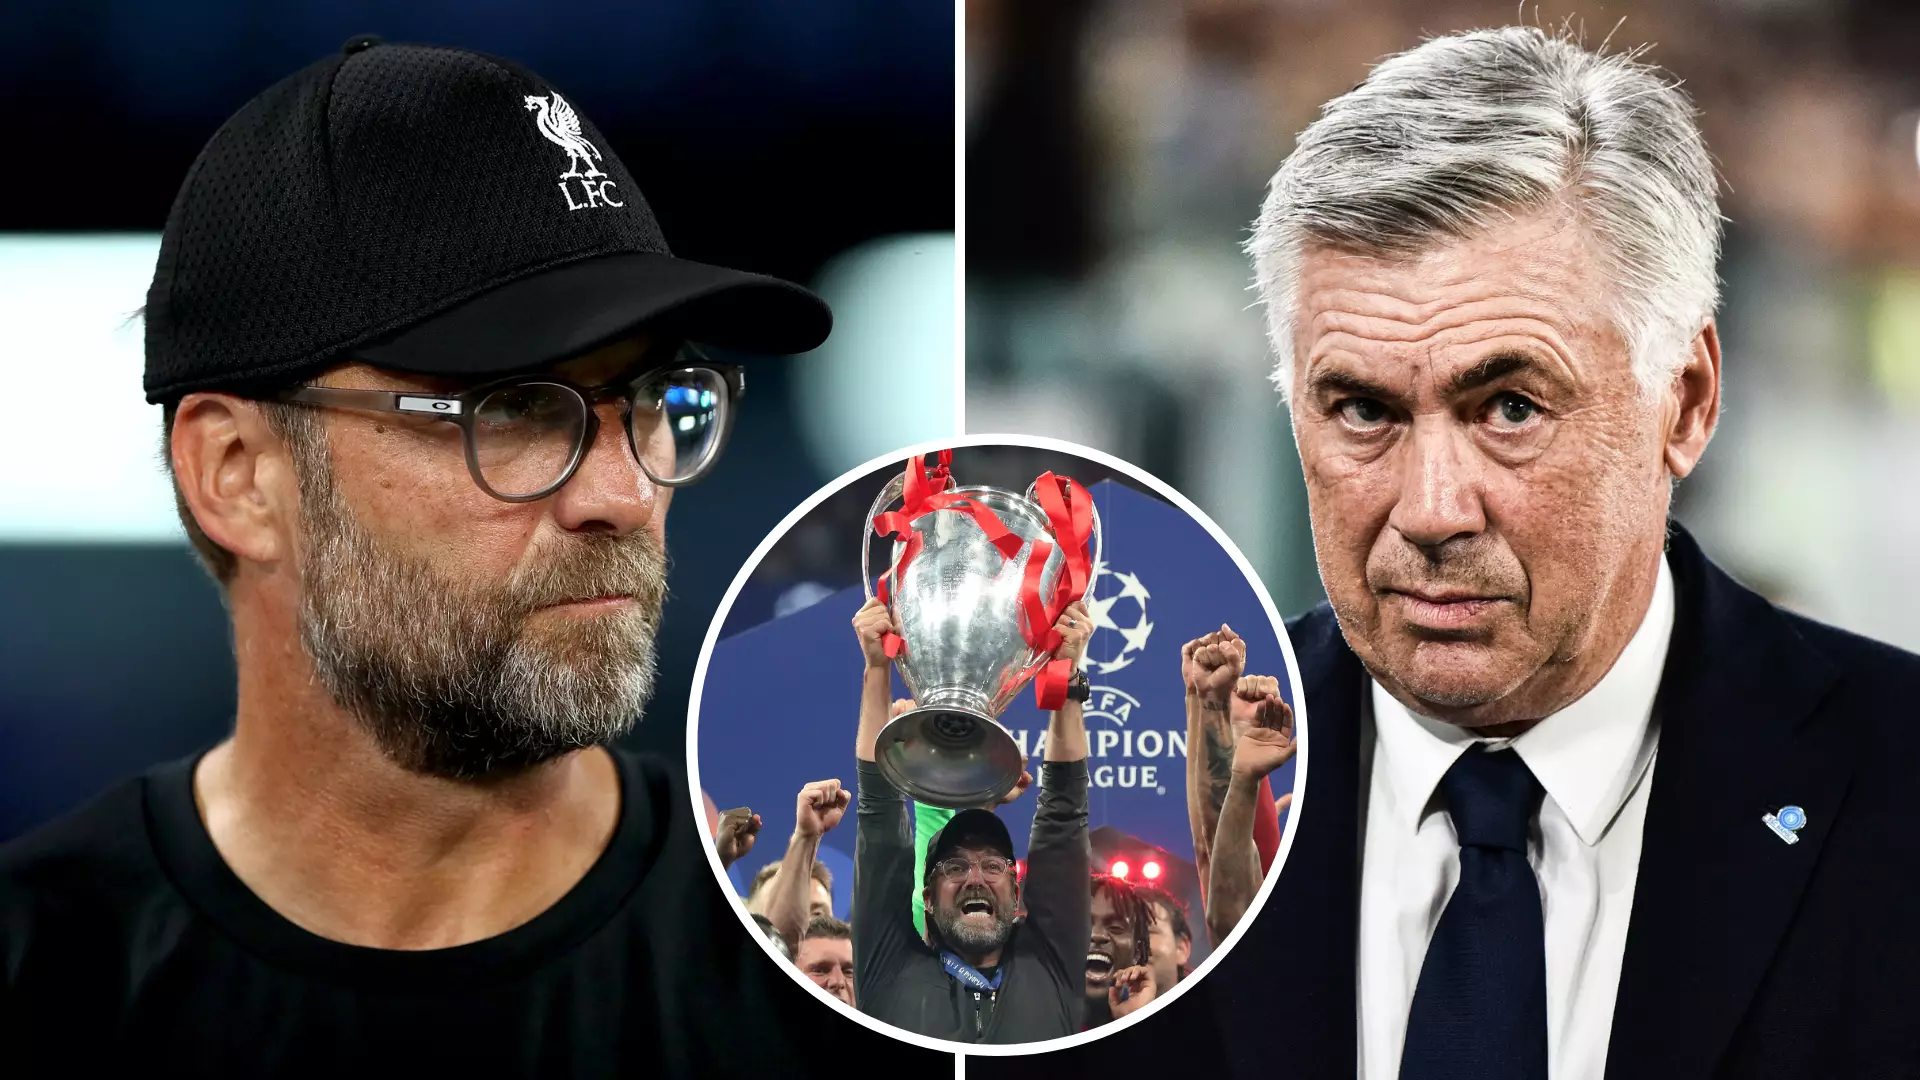 Carlo Ancelotti Joked With Jurgen Klopp That Liverpool Would Still Win The Champions League After Napoli Defeat